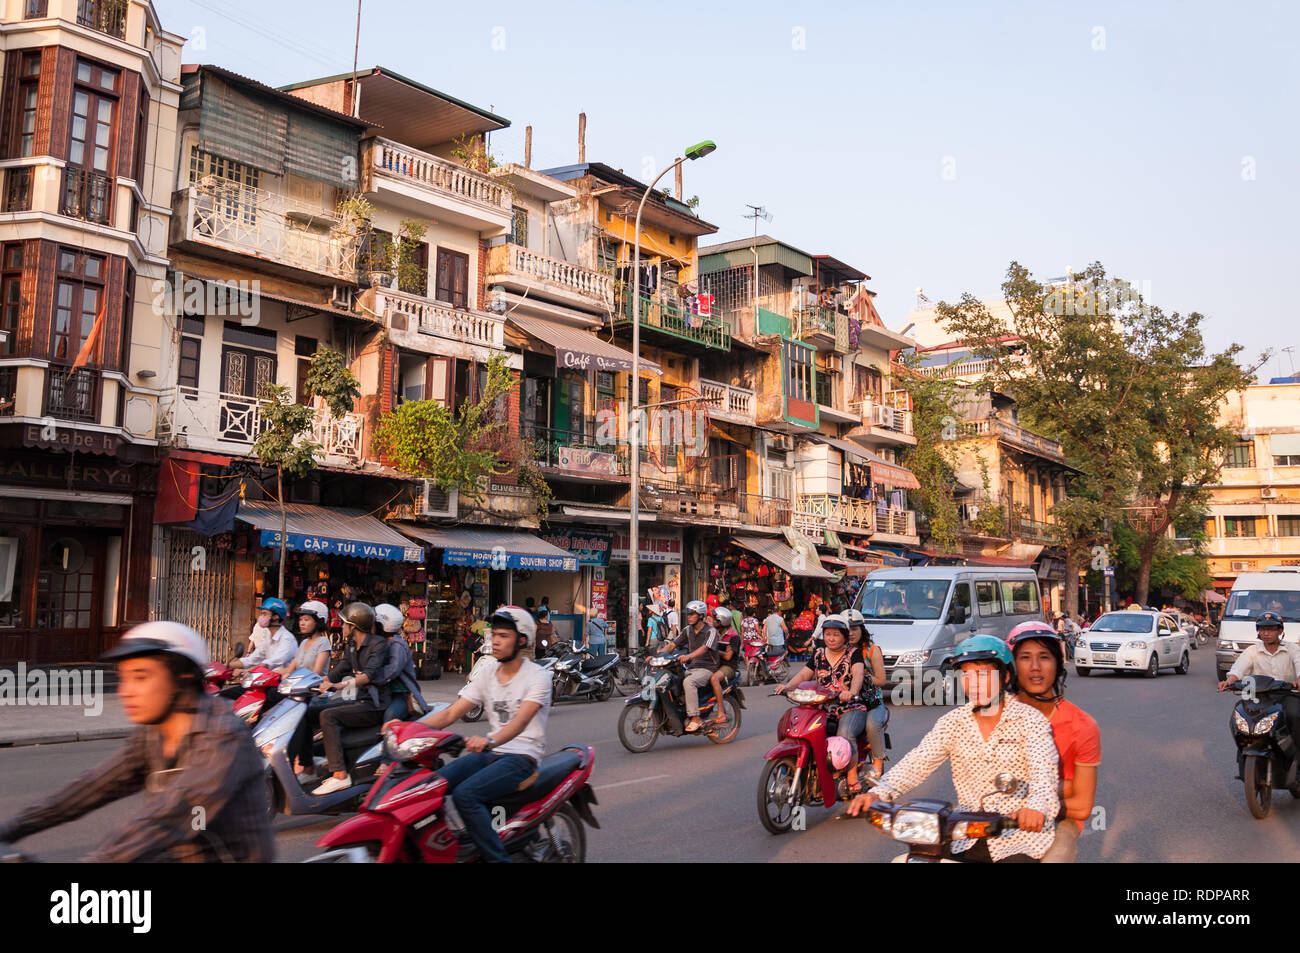 Busy intersection with several cars, mopeds and motorbikes on the road in afternoon light, Hanoi, Vietnam Stock Photo